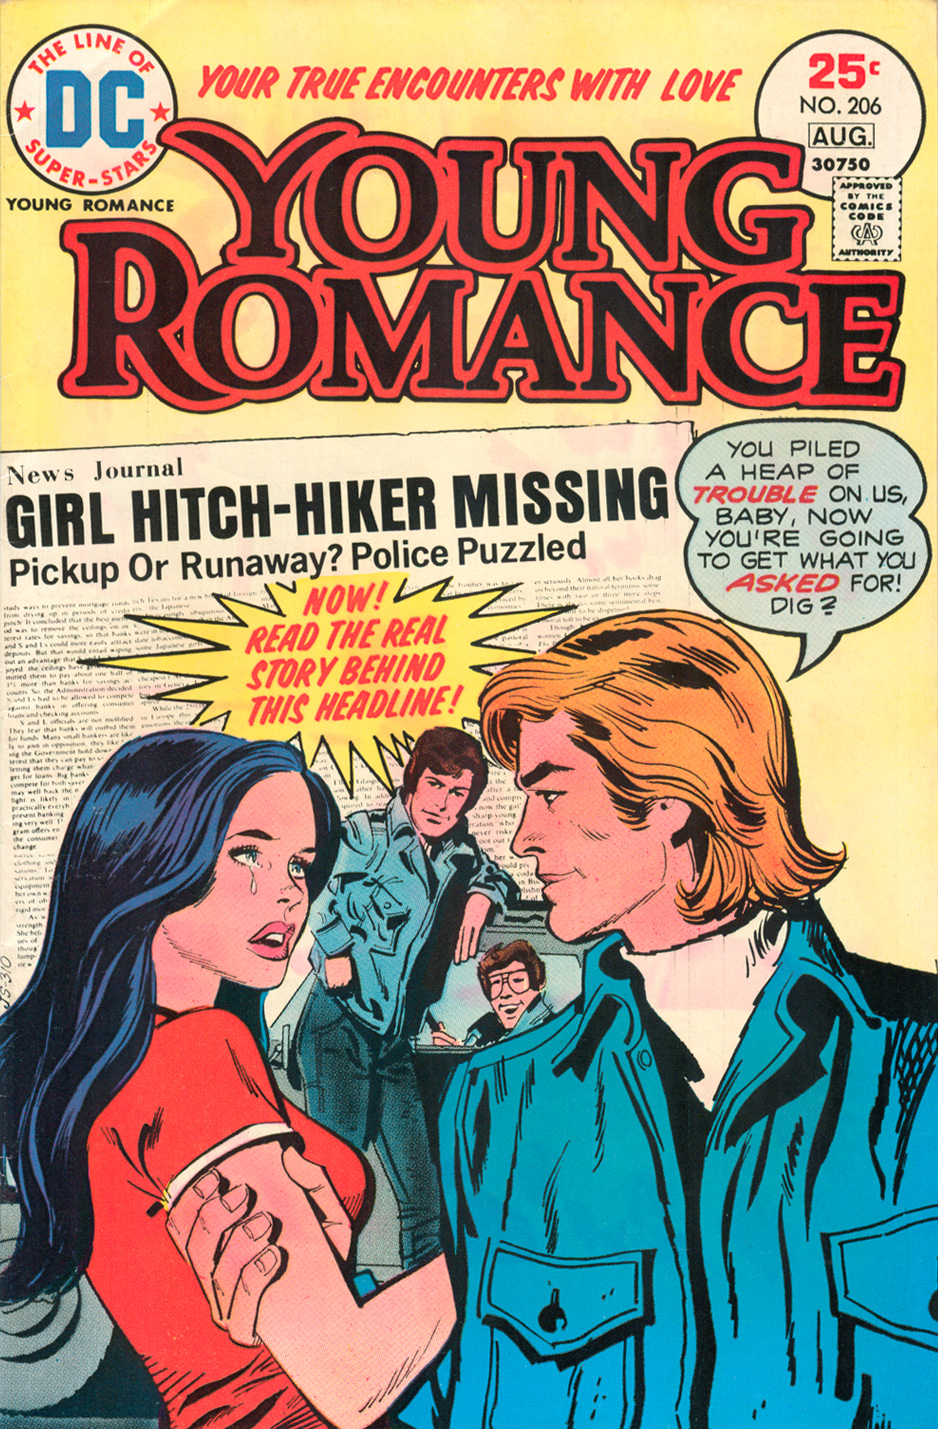 Serious Topics In 1970s Romance Comics Girl Hitch Hiker Missing